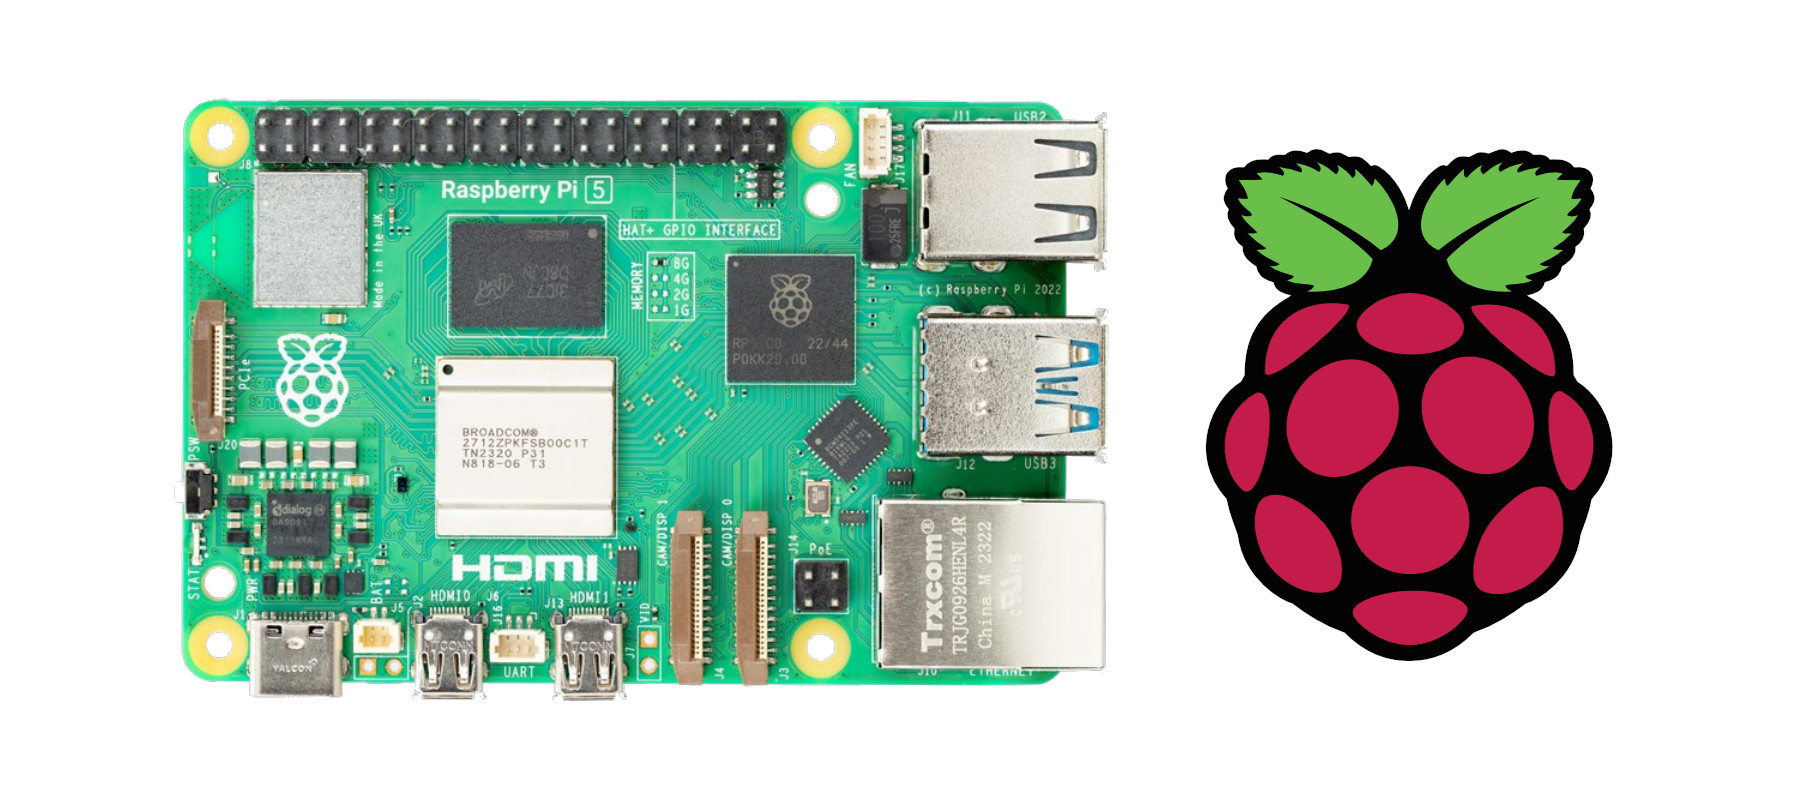 raspberry-pi-5-released-featured-image